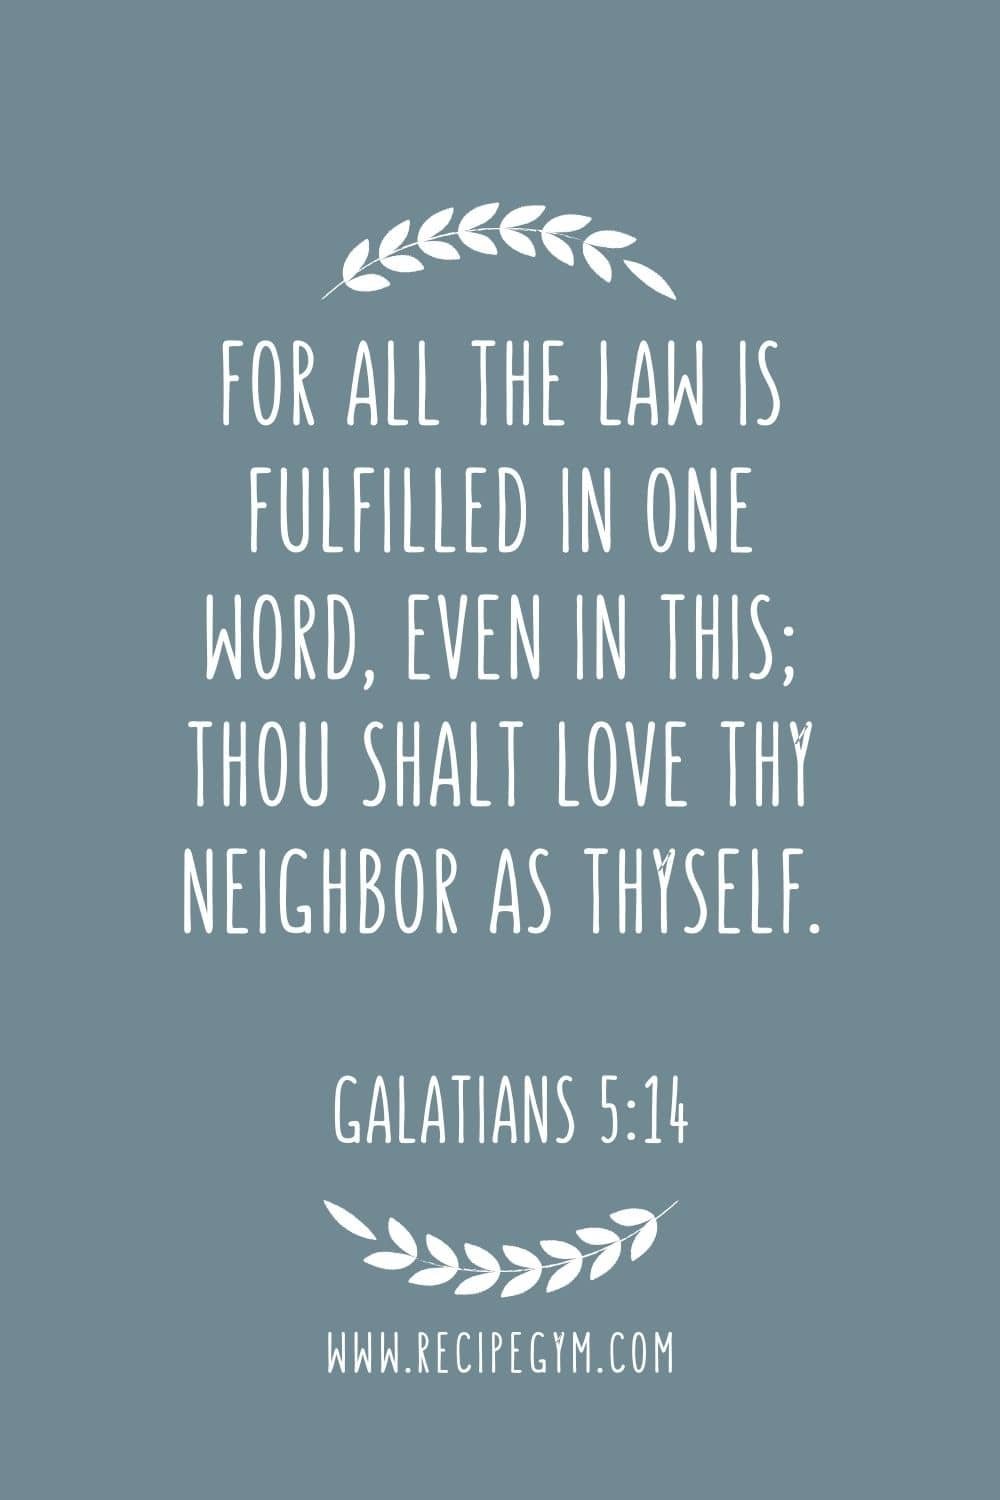 3Q For all the law is fulfilled in one word even in this Thou shalt love thy neighbor as thyself